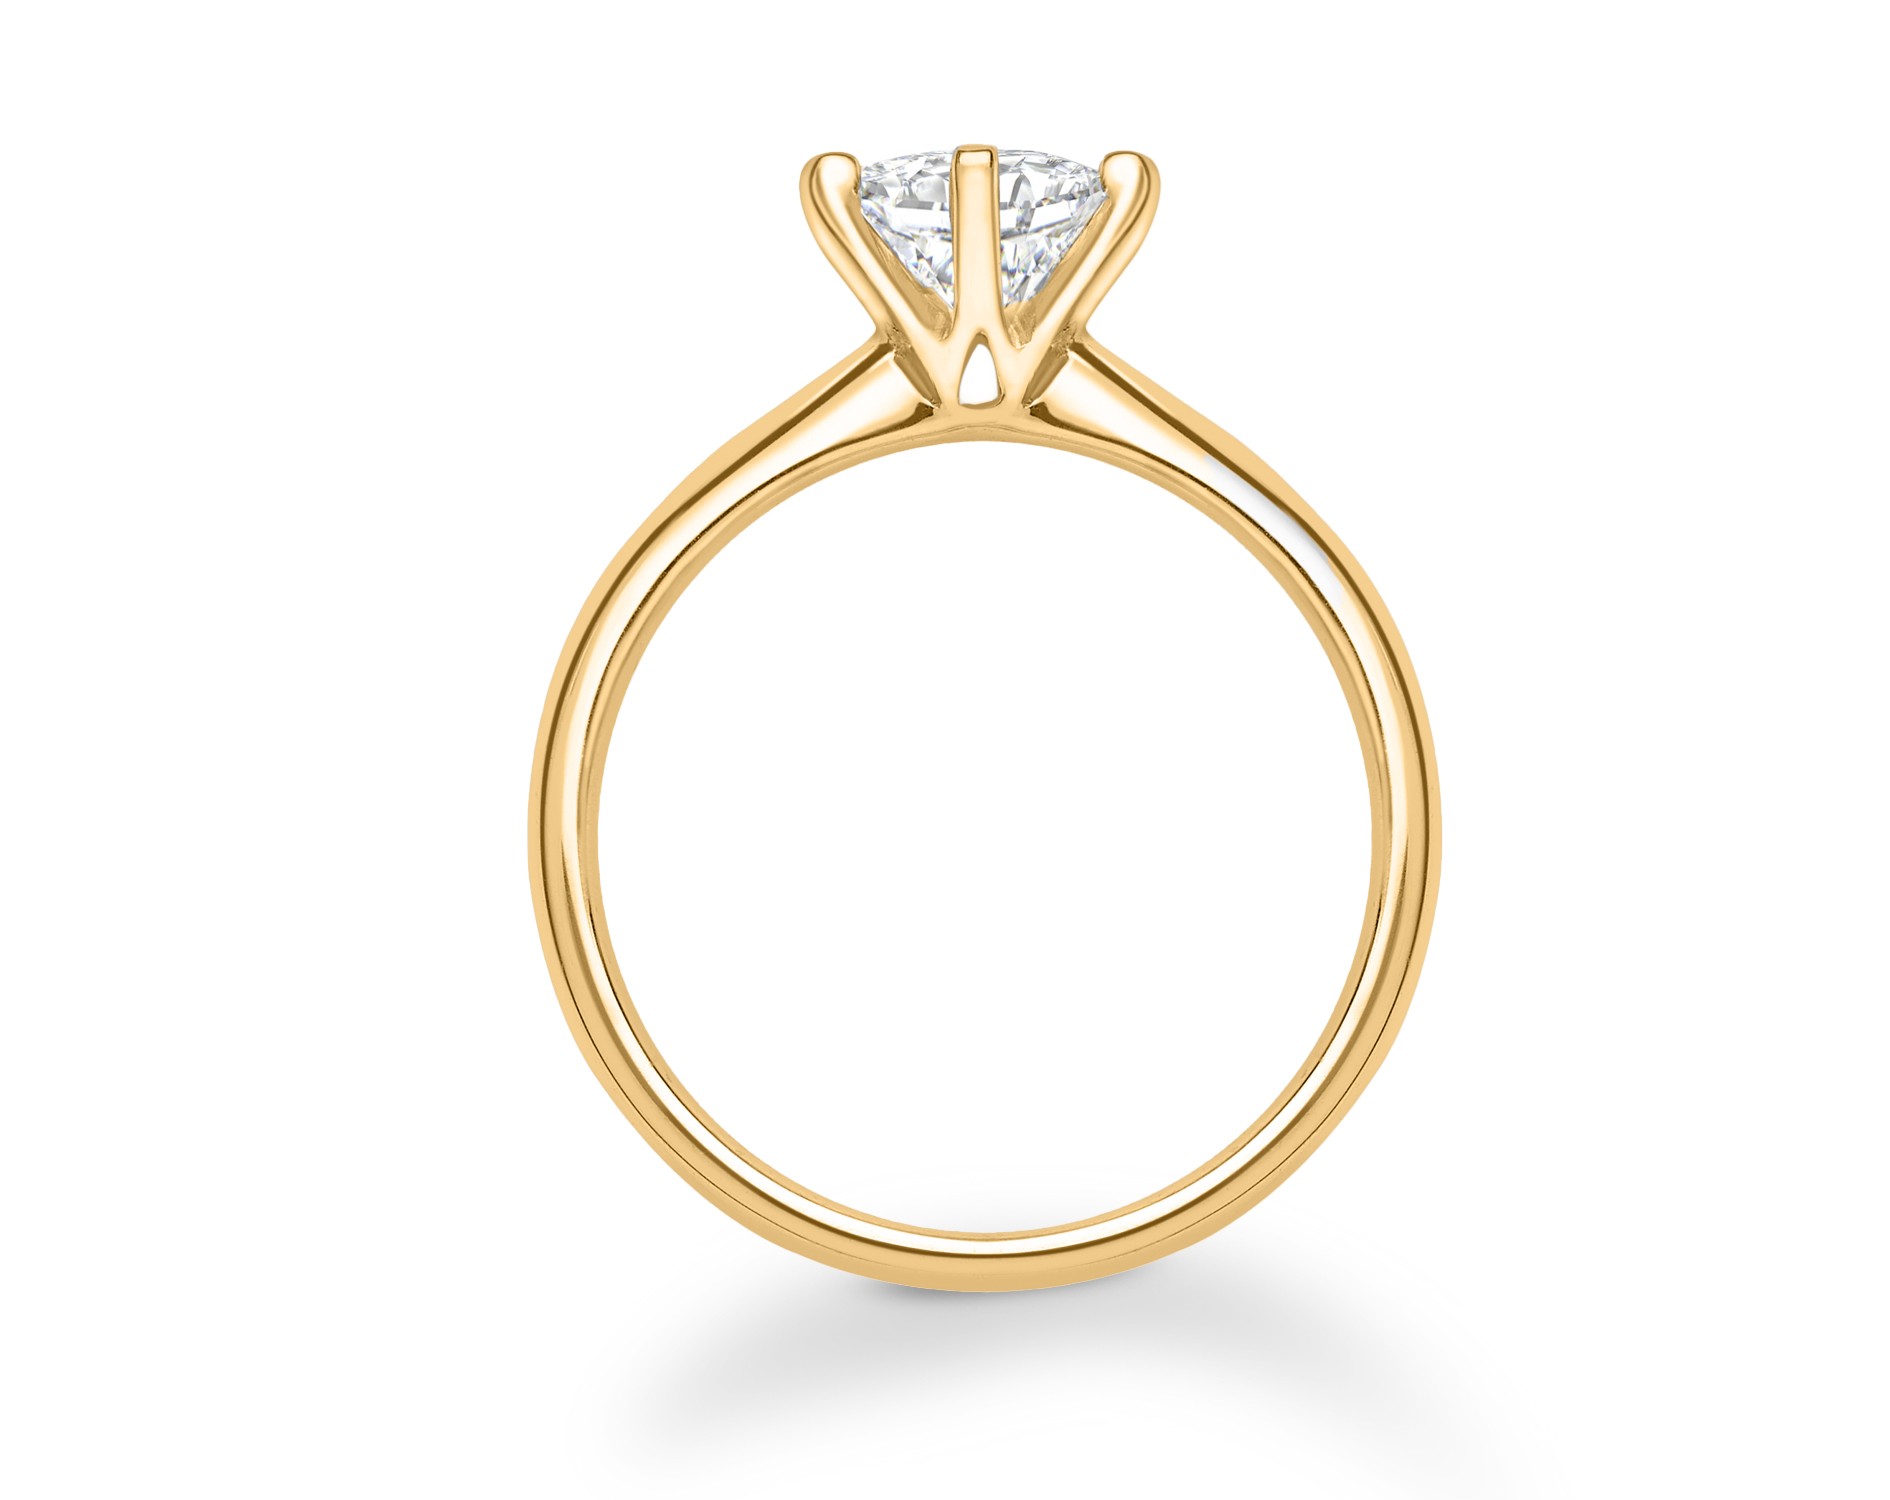 18K YELLOW GOLD 6 PRONGS SOLITAIRE ROUND CUT DIAMOND ENGAGEMENT RING